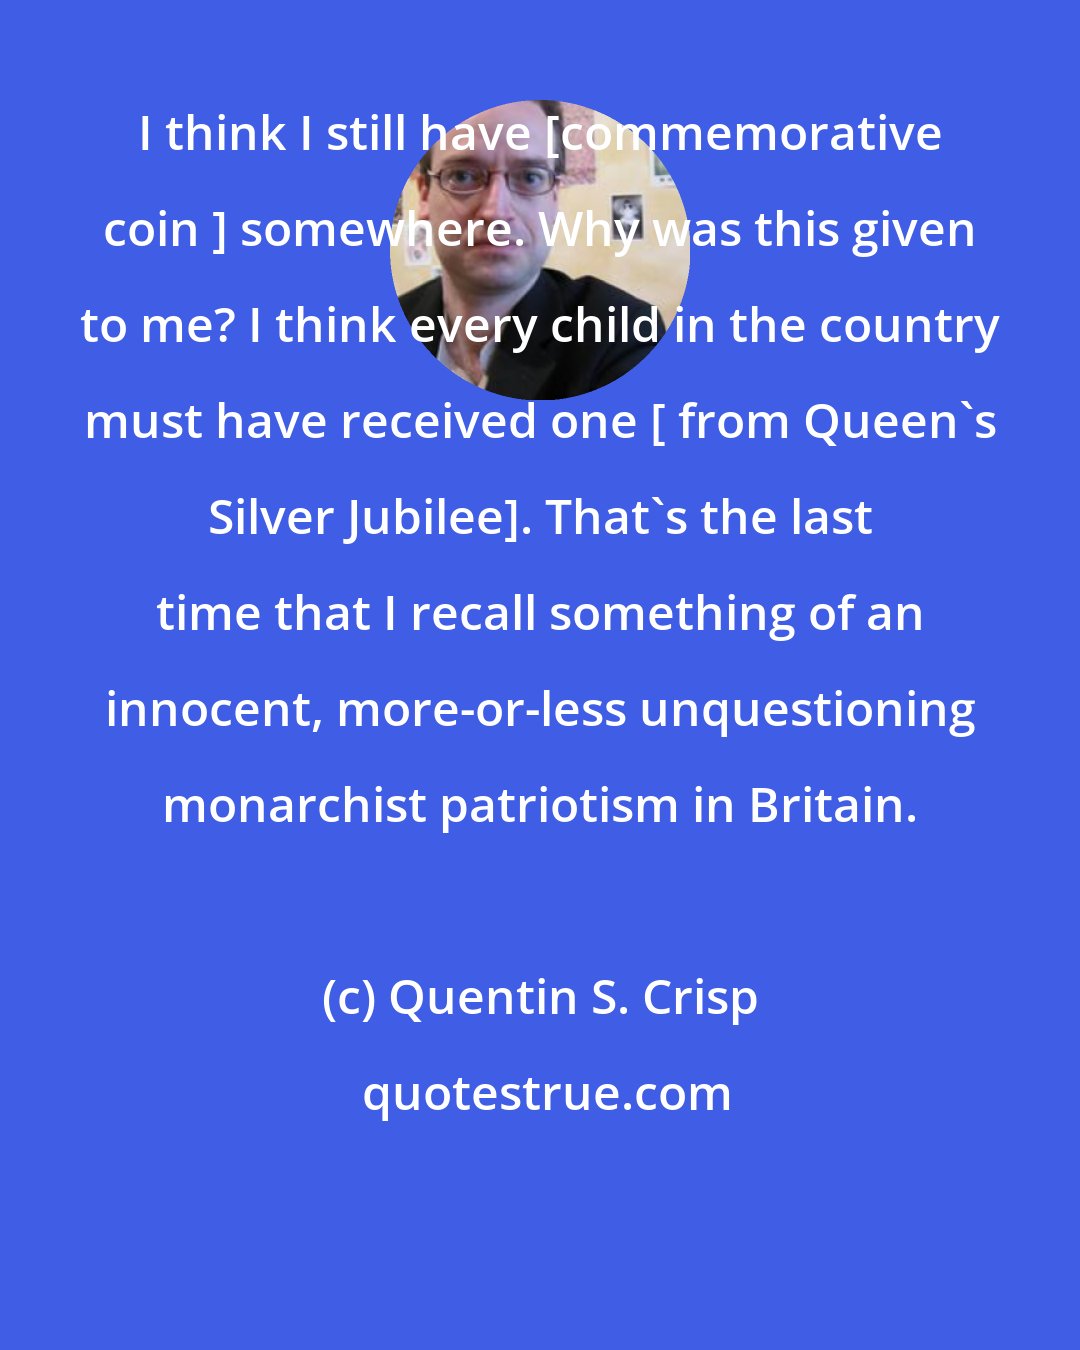 Quentin S. Crisp: I think I still have [commemorative coin ] somewhere. Why was this given to me? I think every child in the country must have received one [ from Queen's Silver Jubilee]. That's the last time that I recall something of an innocent, more-or-less unquestioning monarchist patriotism in Britain.